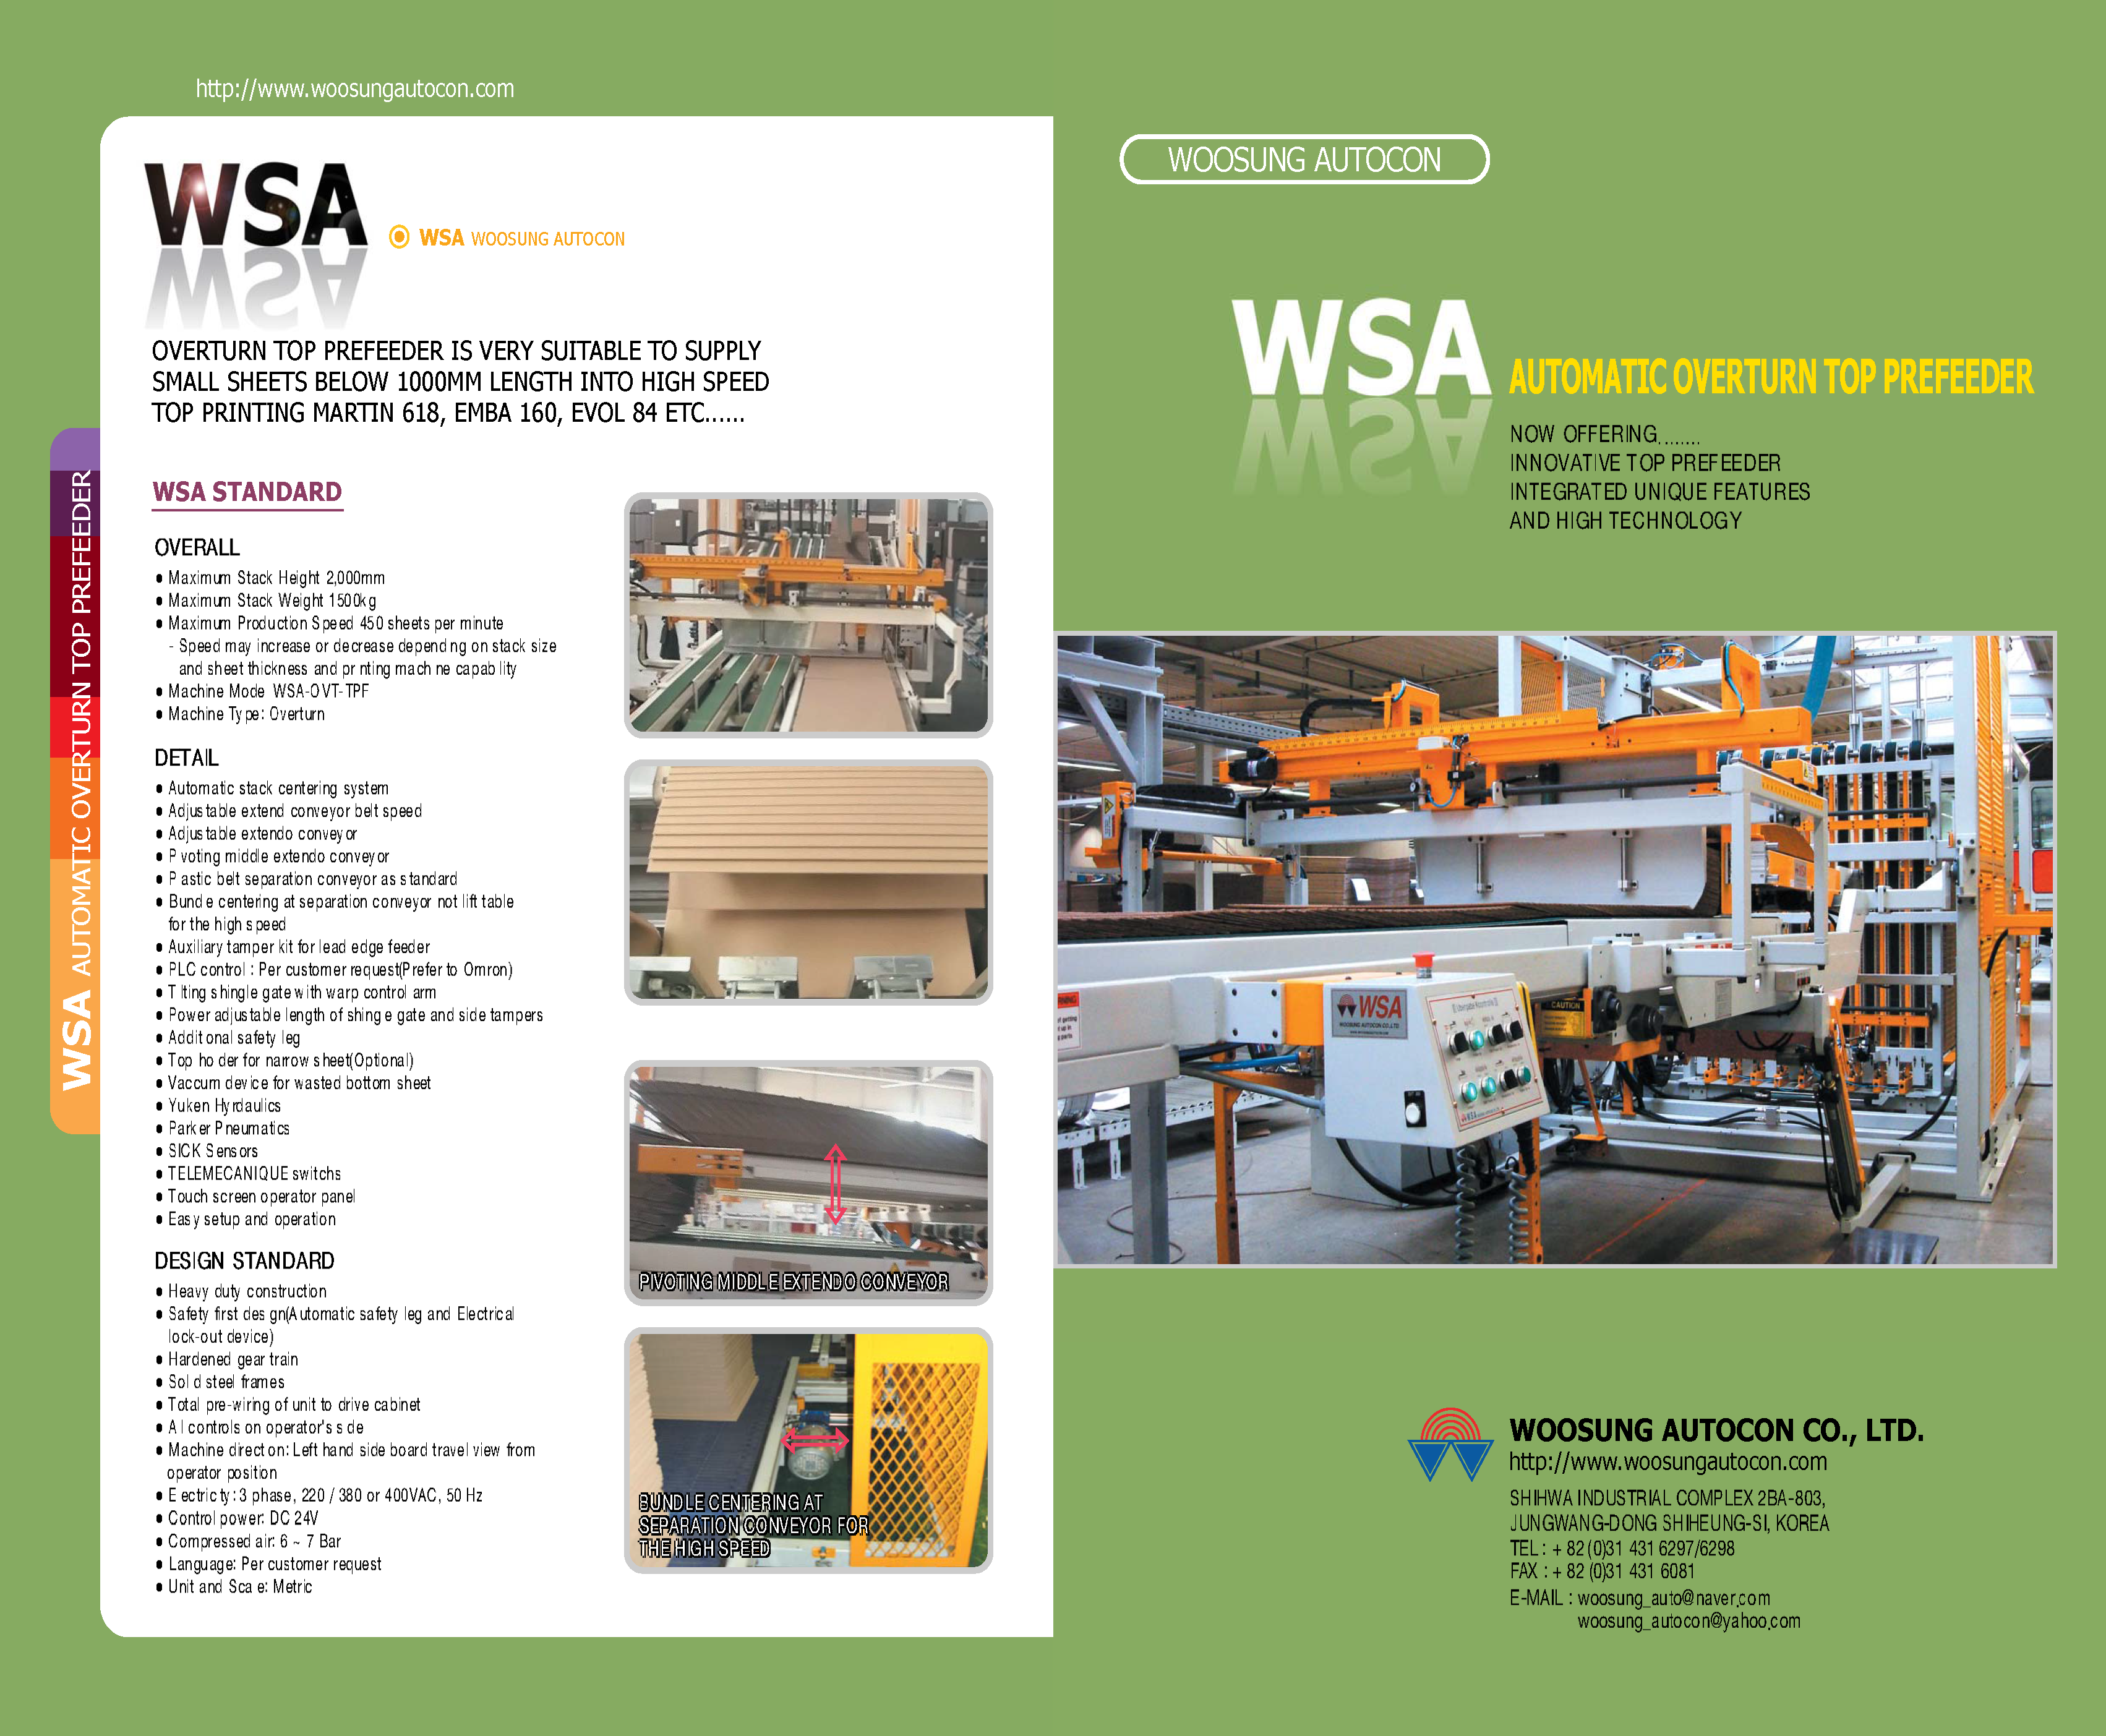 Learn more about the WSA Automatic Overturn Top Prefeeder and Prefeeder with Dual Inverter in the WSA Brochure.